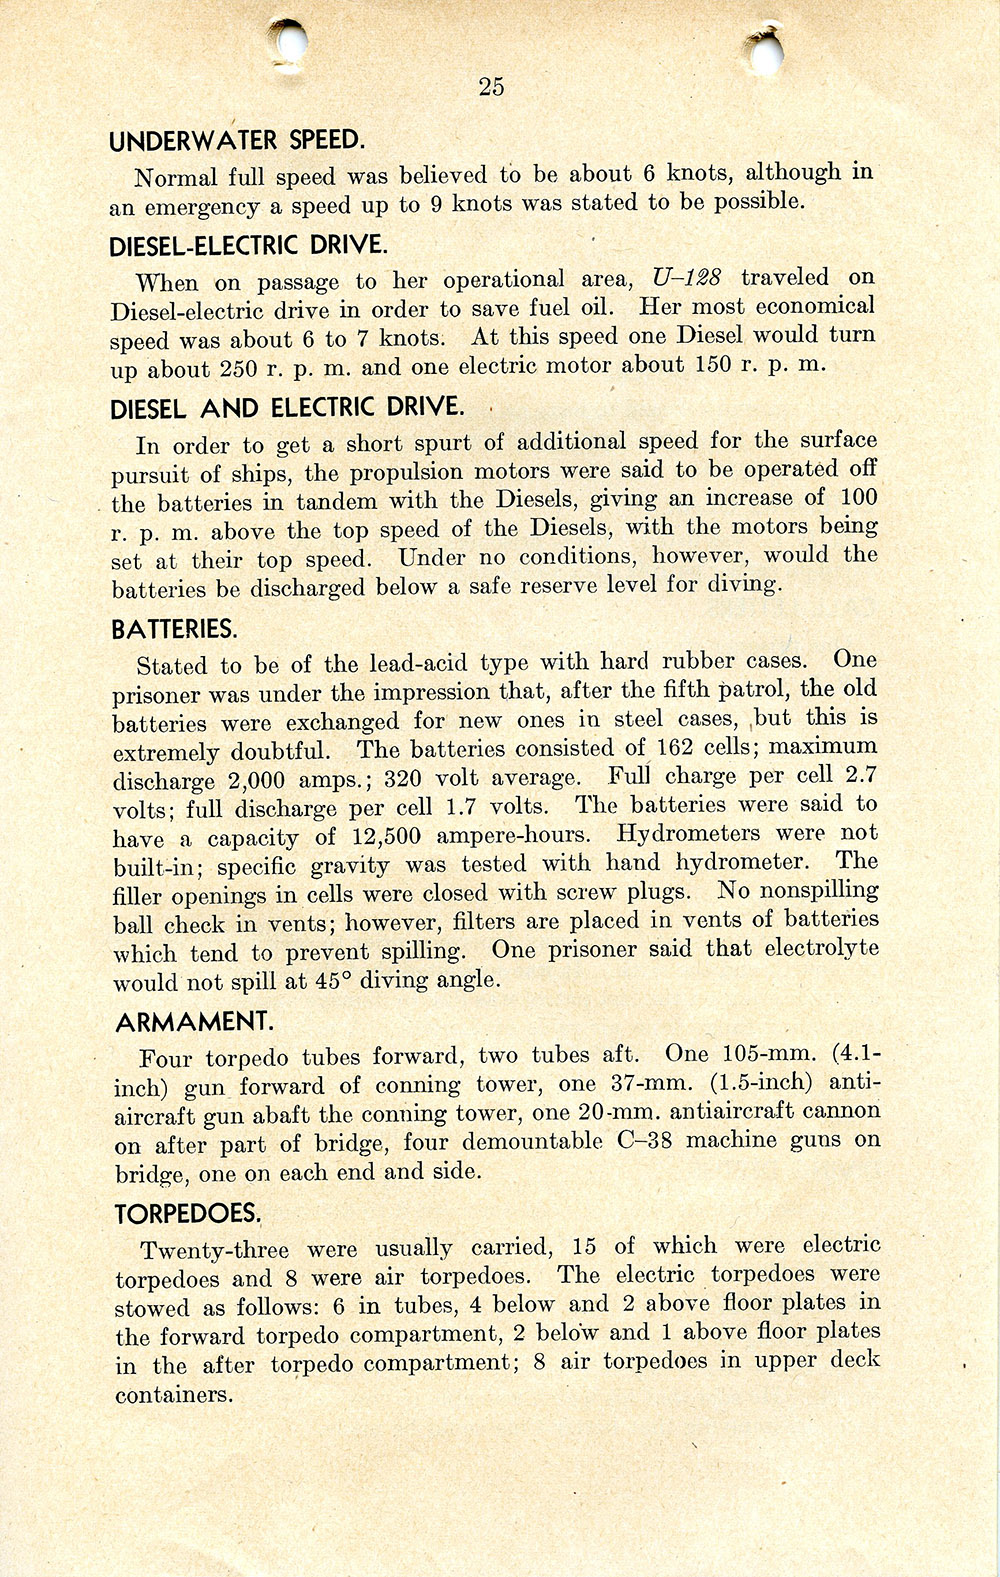 Report on the Sinking of U-128